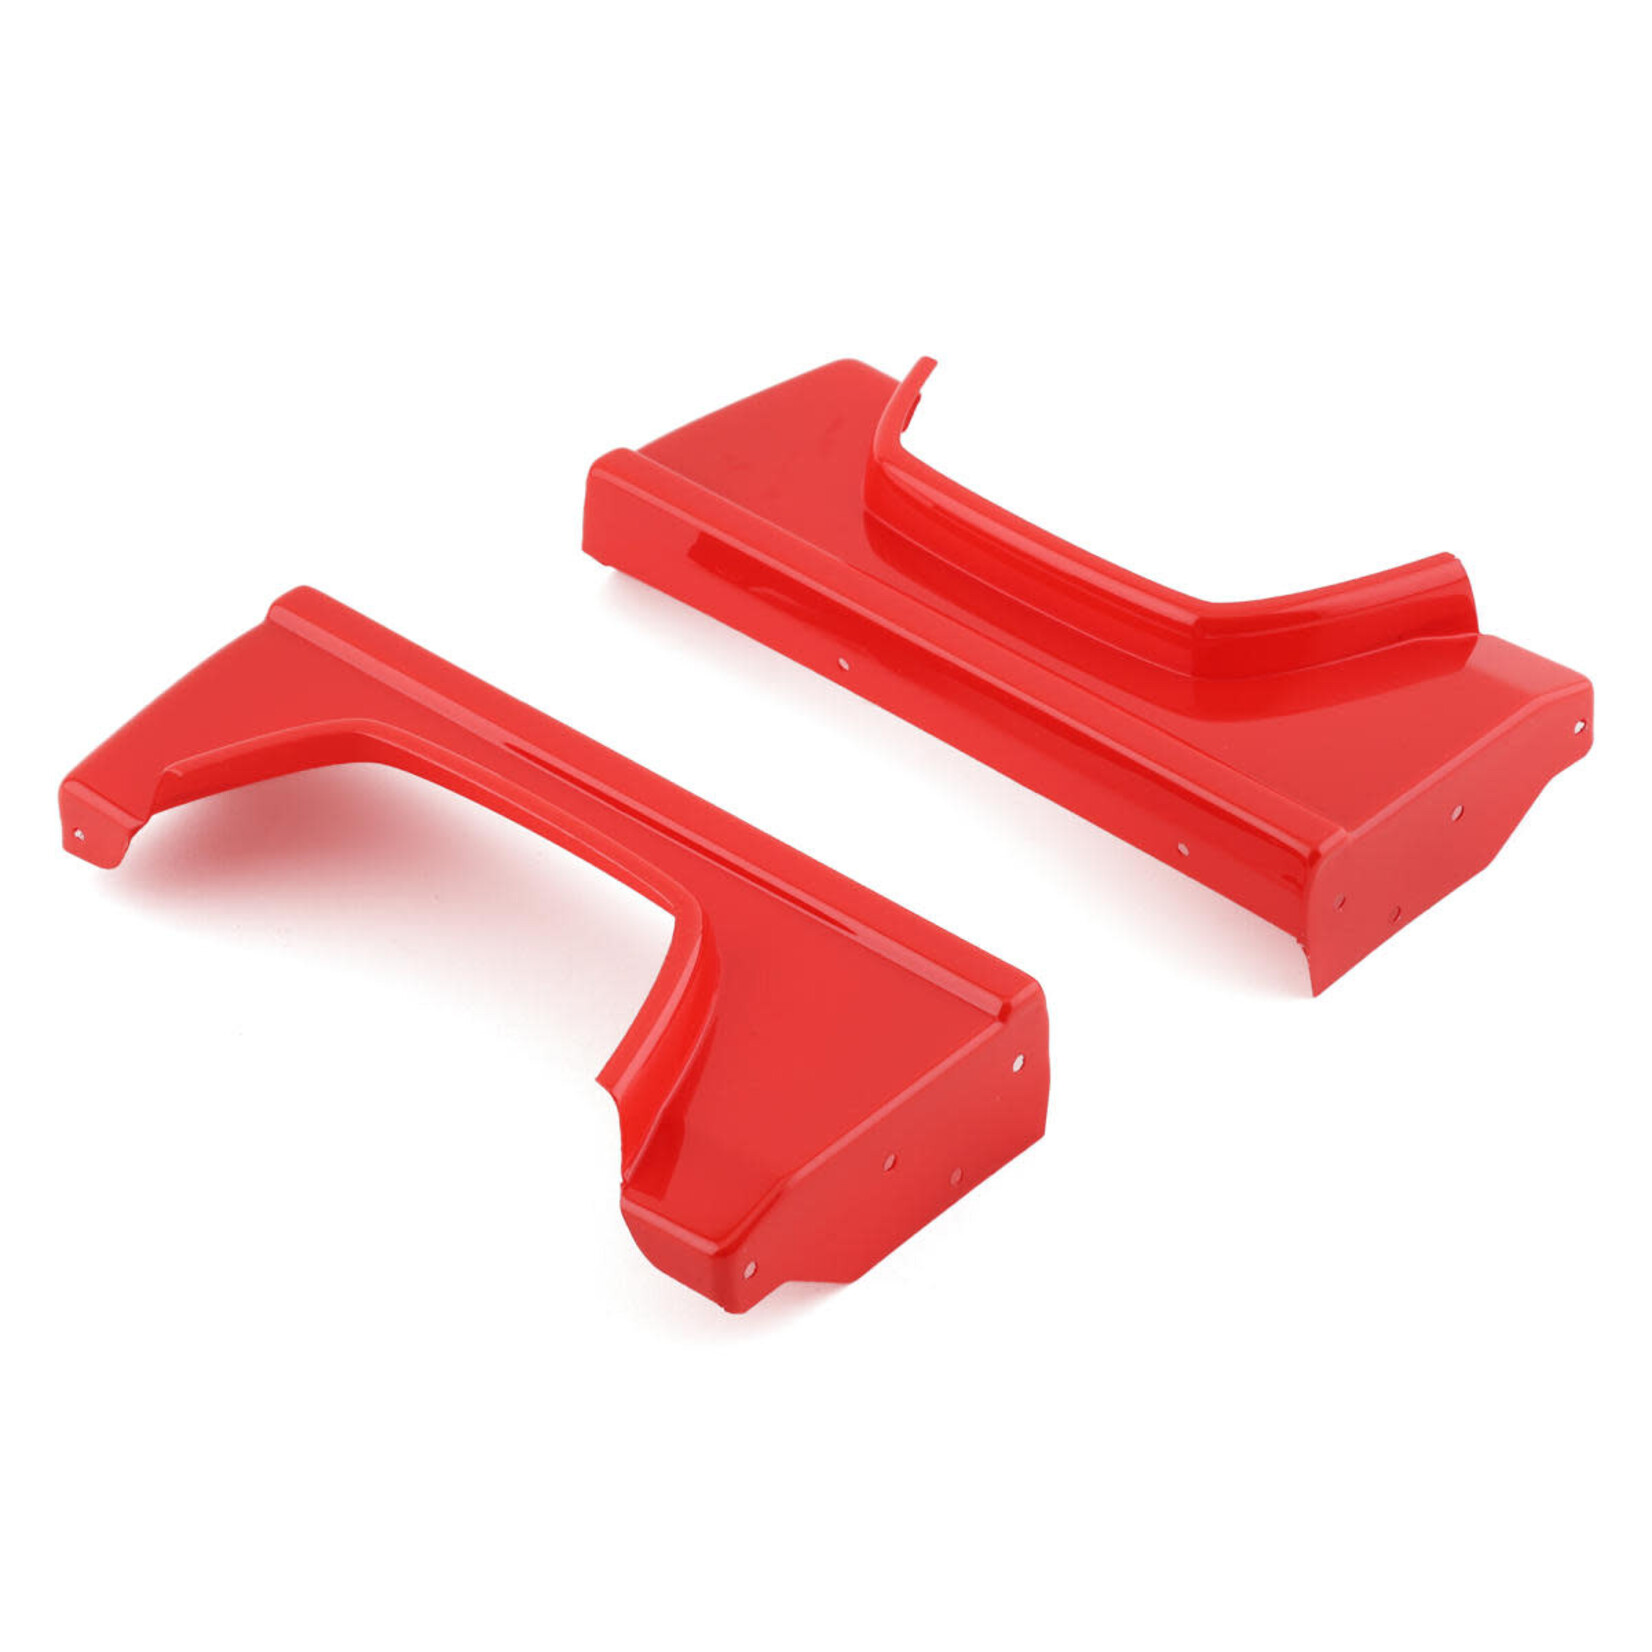 Vanquish Products Vanquish Products VS4-10 Phoenix Pre-Painted Bedsides (Red) (2) #VPS10222